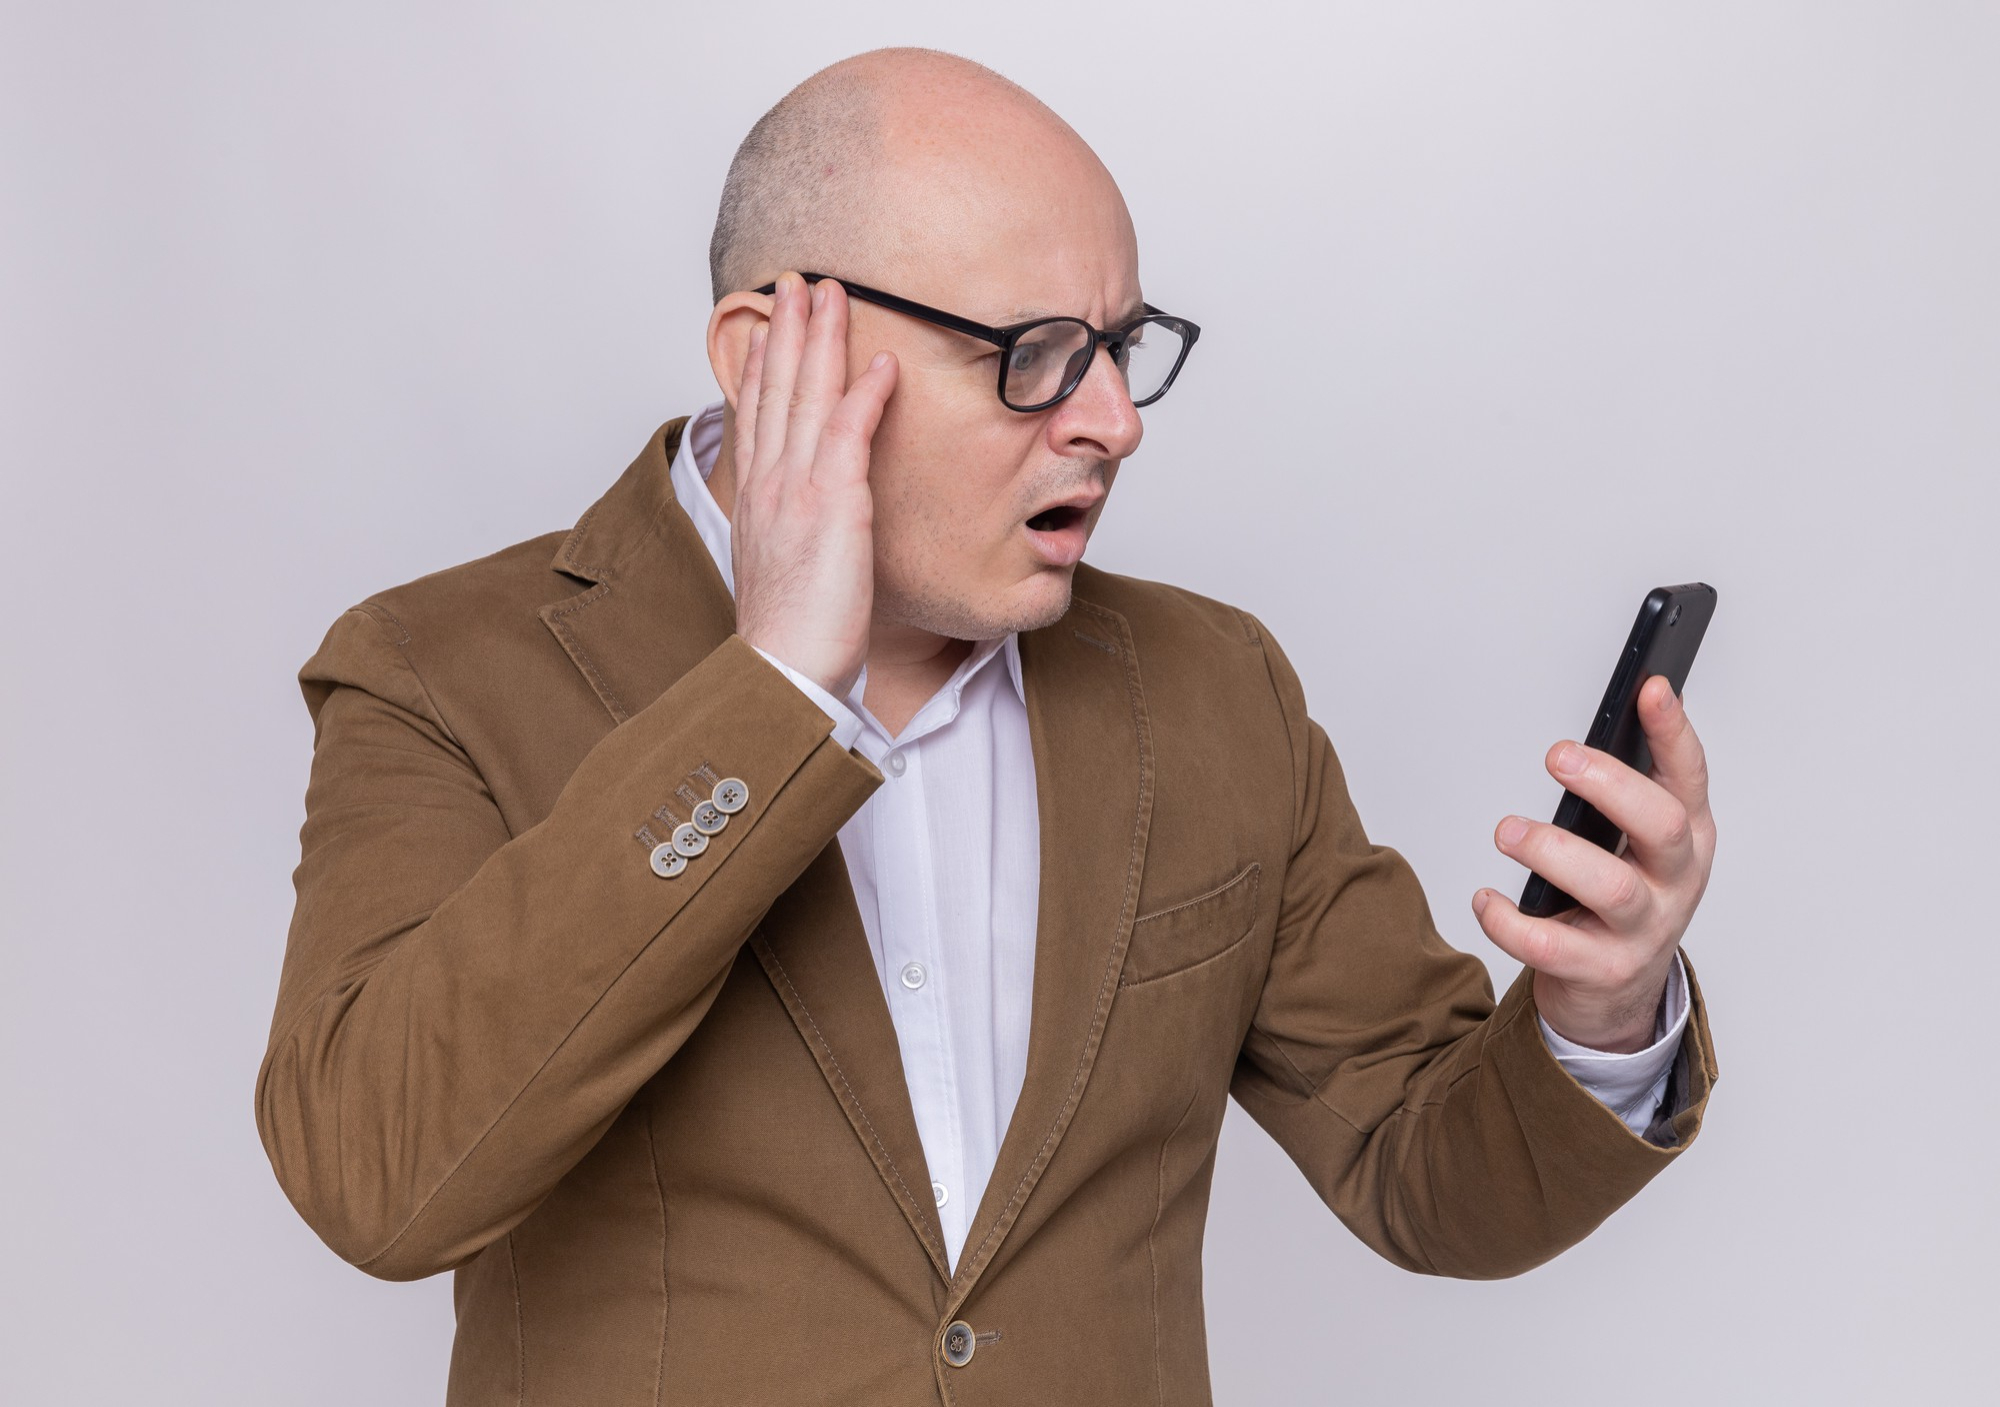 An upset and shocked man listening to a recording on his phone | Source: Pexels